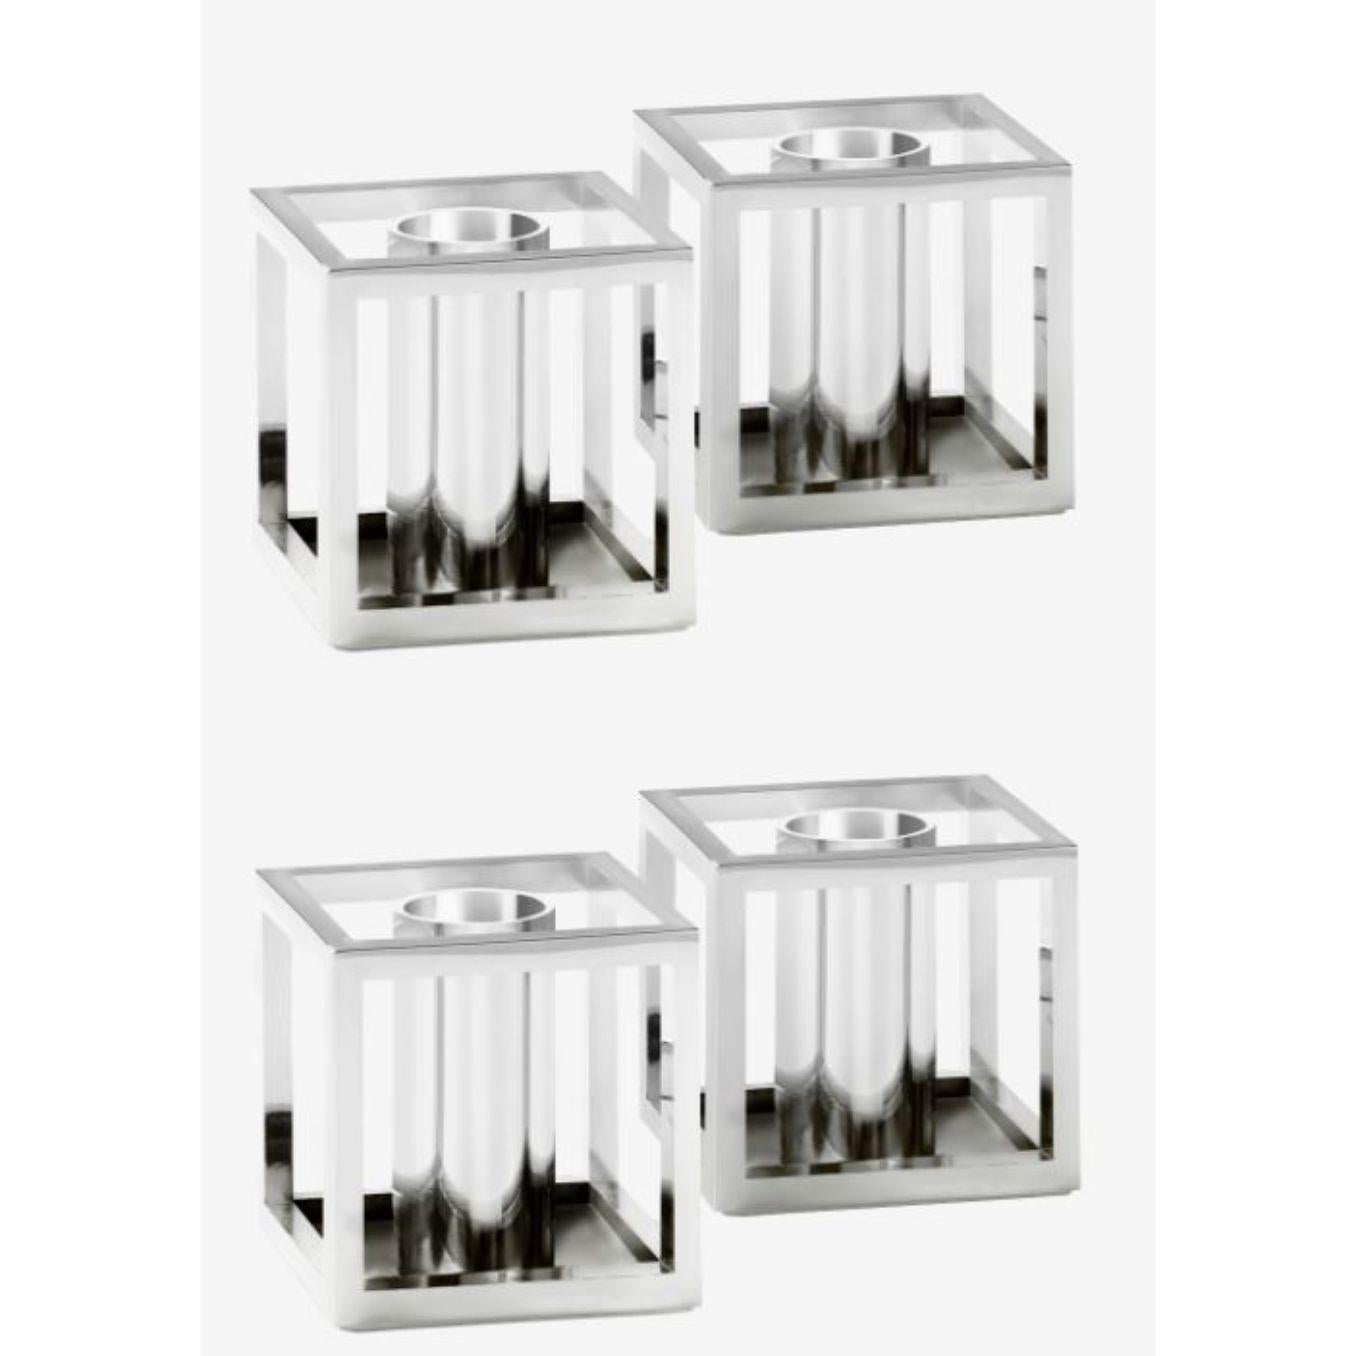 Set of 4 nickel plated Kubus micro candle holders by Lassen.
Dimensions: D 3.50 x W 3.50 x H 3.65 cm. 
Materials: Metal 
Also available in different dimensions.
Weight: 0.15 Kg

A new small wonder has seen the light of day. Kubus Micro is a